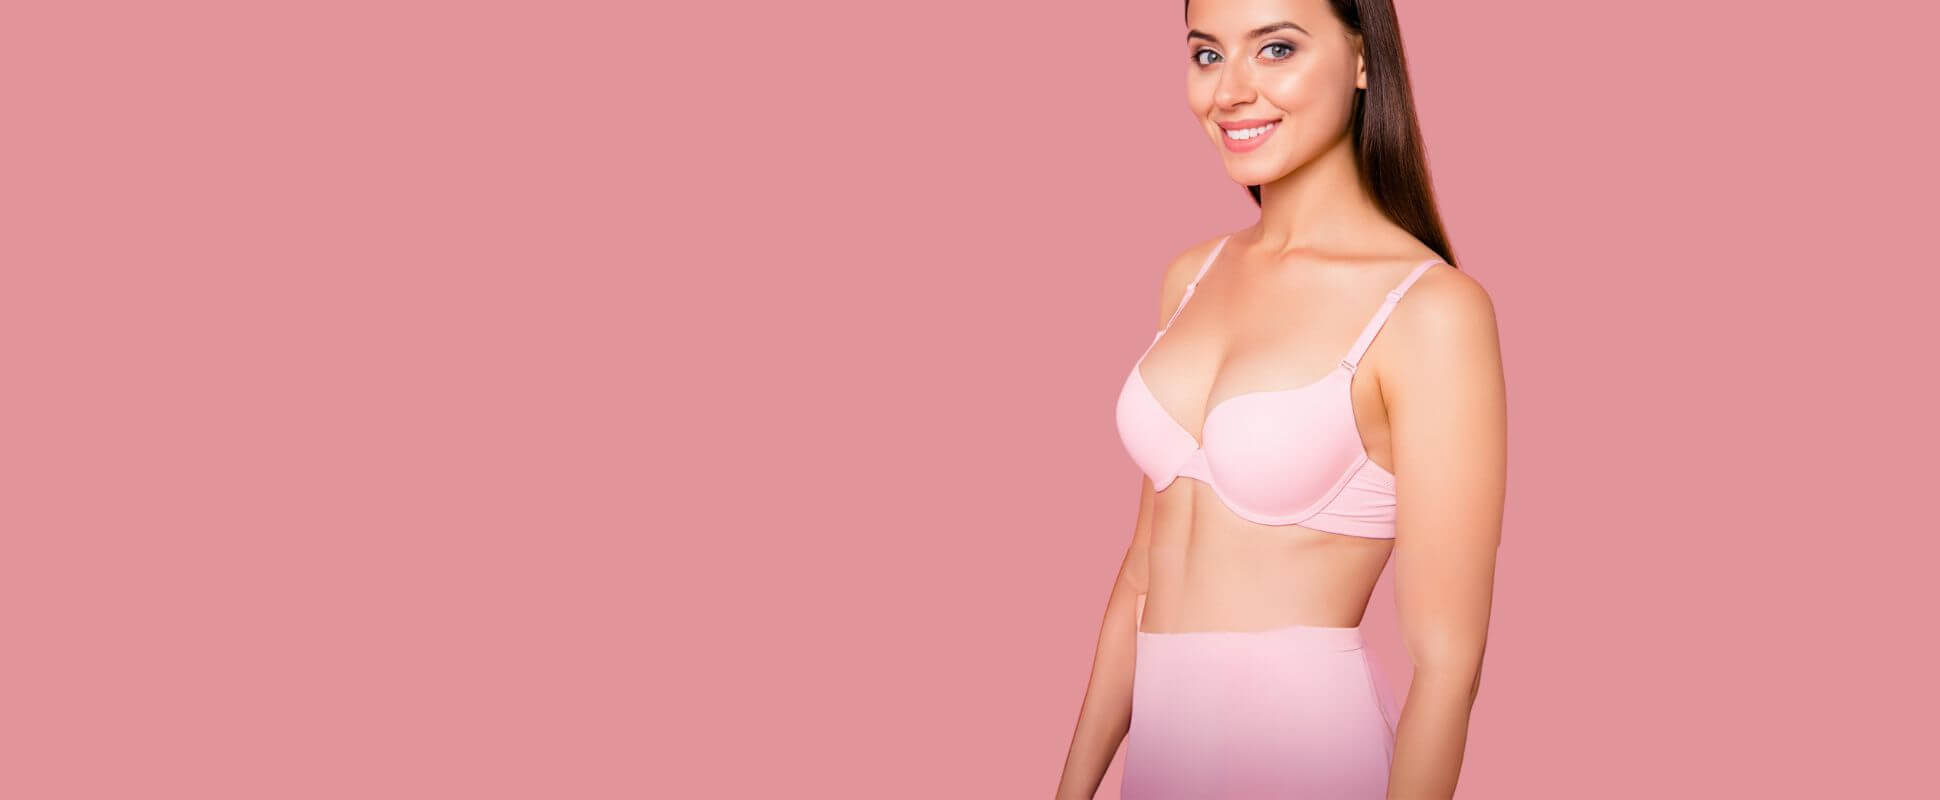 MIBIS technique for breast augmentation also available in Spain